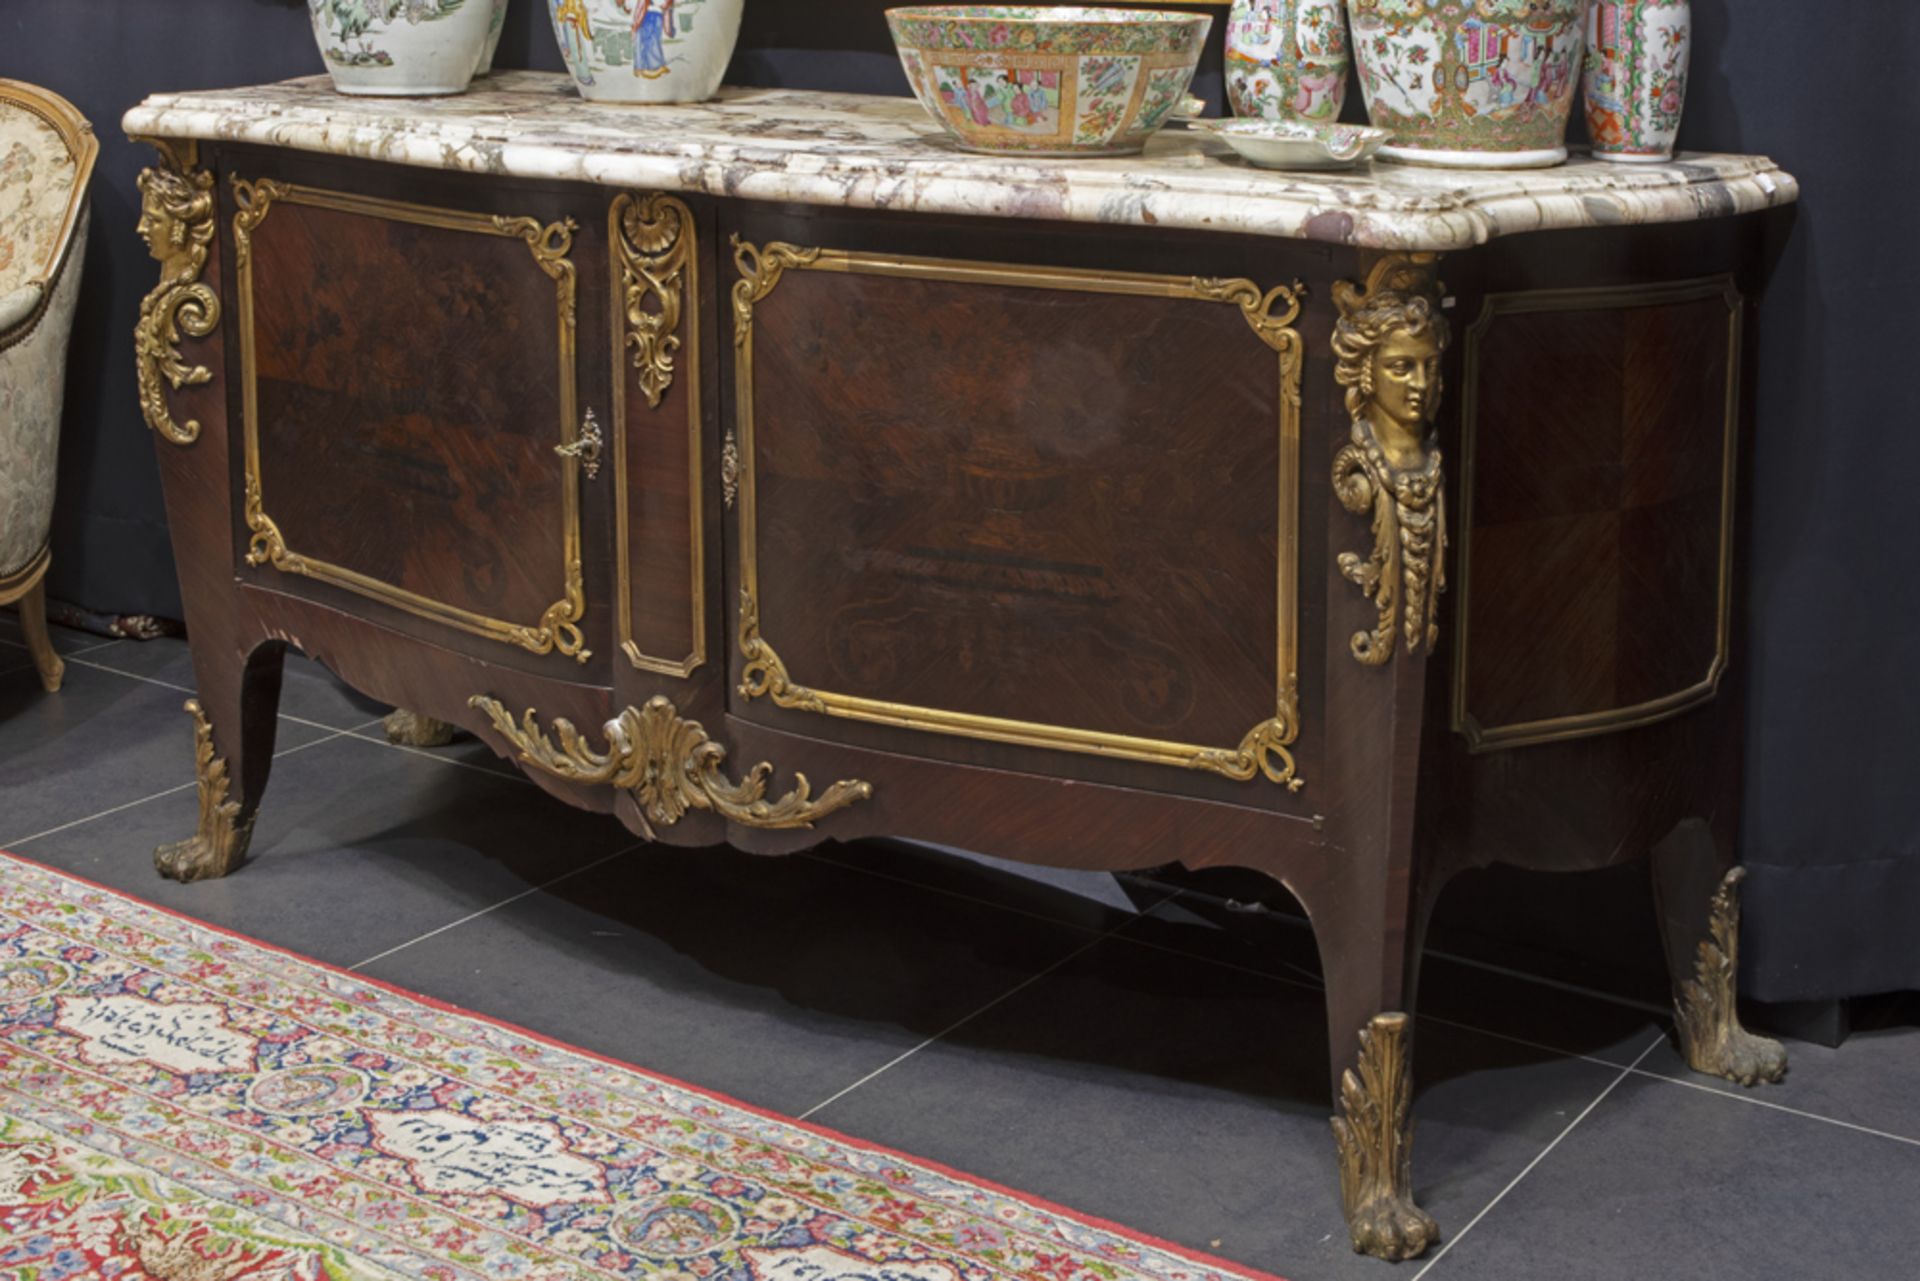 beautiful antique, presumably French Louis XV style sideboard in rose-wood with rich mountings in